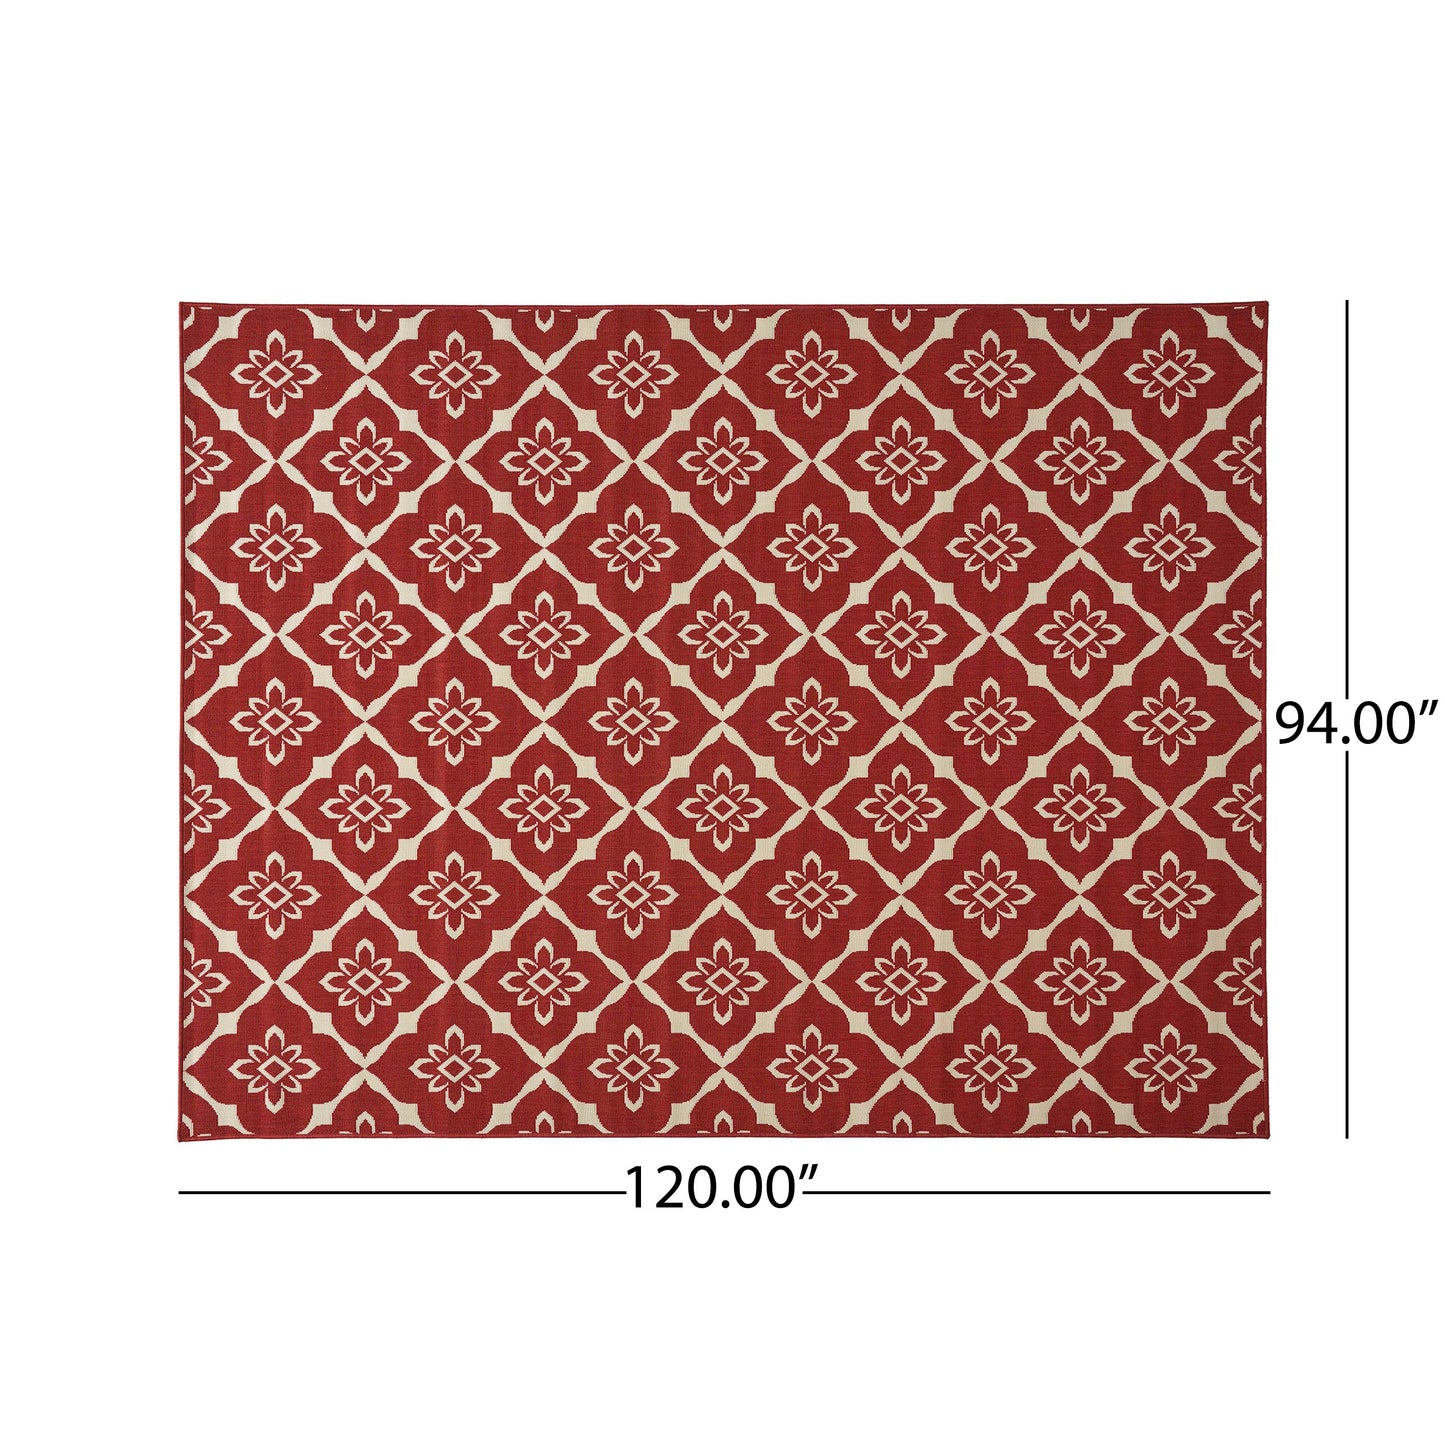 Eluzer Outdoor Trellis Area Rug, Red and Ivory